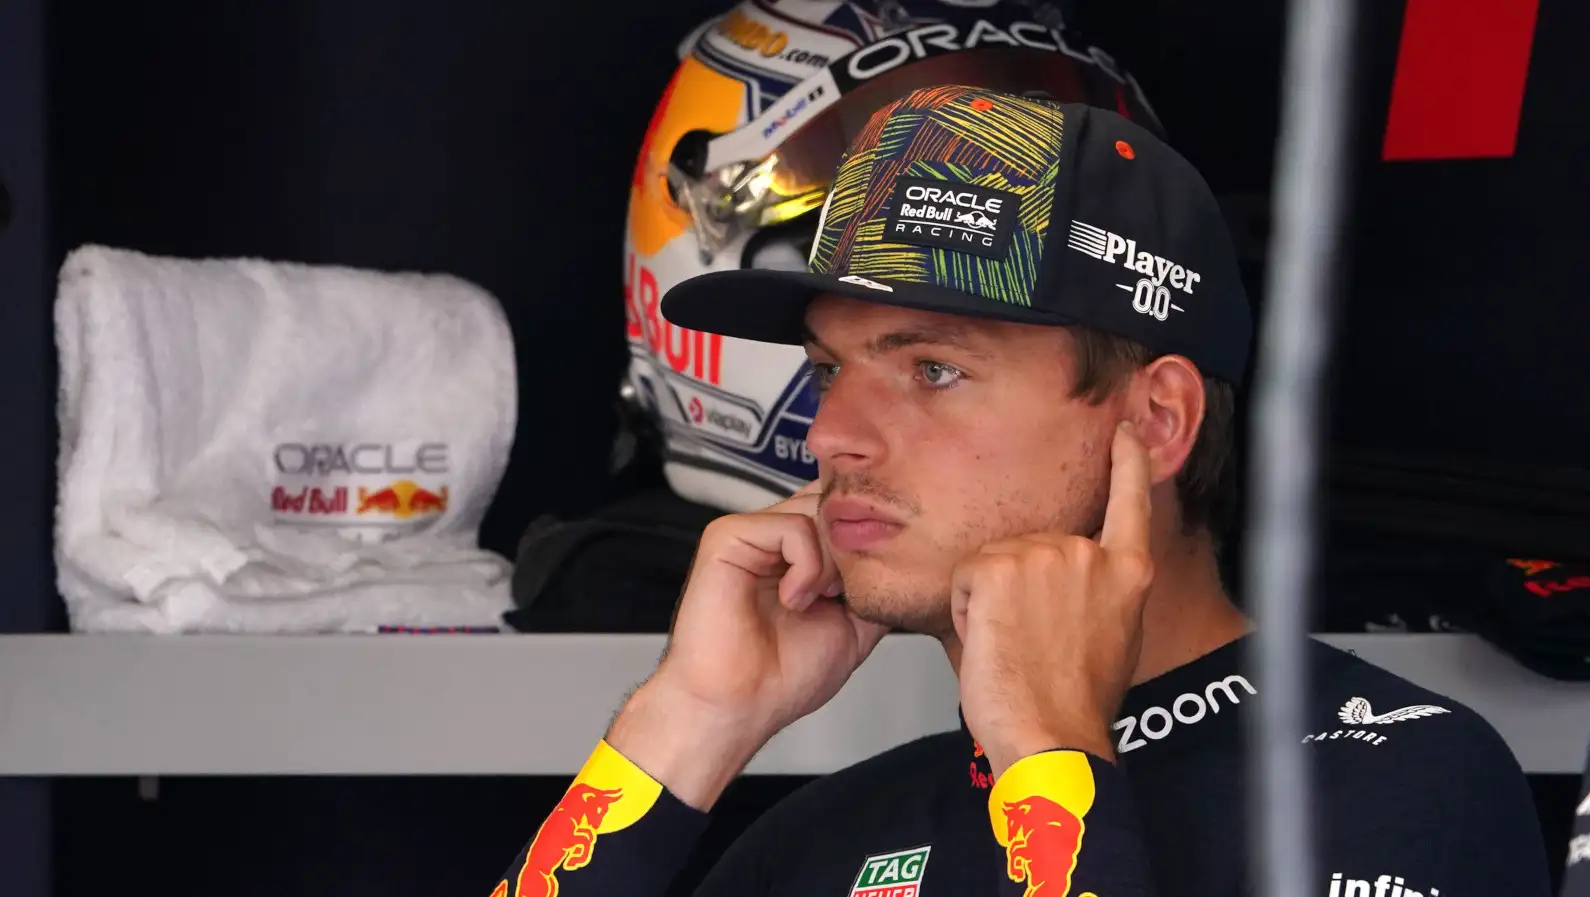 Max Verstappen looking serious in Red Bull's garage at the Dutch GP.